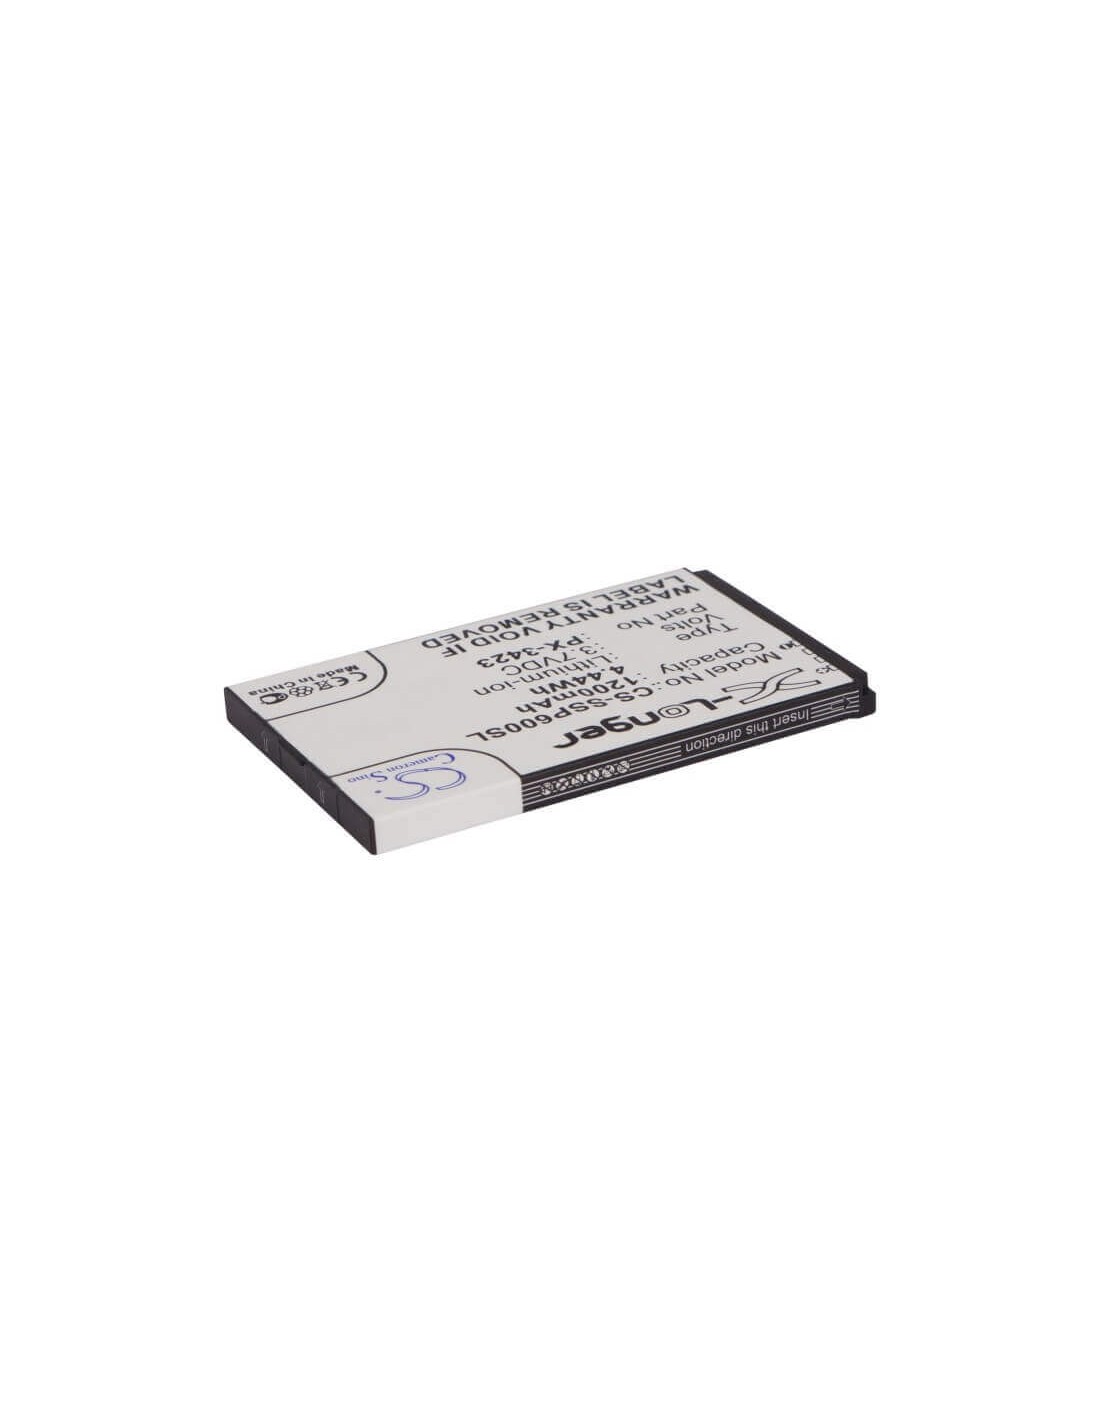 Battery for Simvalley SP-40, SP-60 3.7V, 1200mAh - 4.44Wh